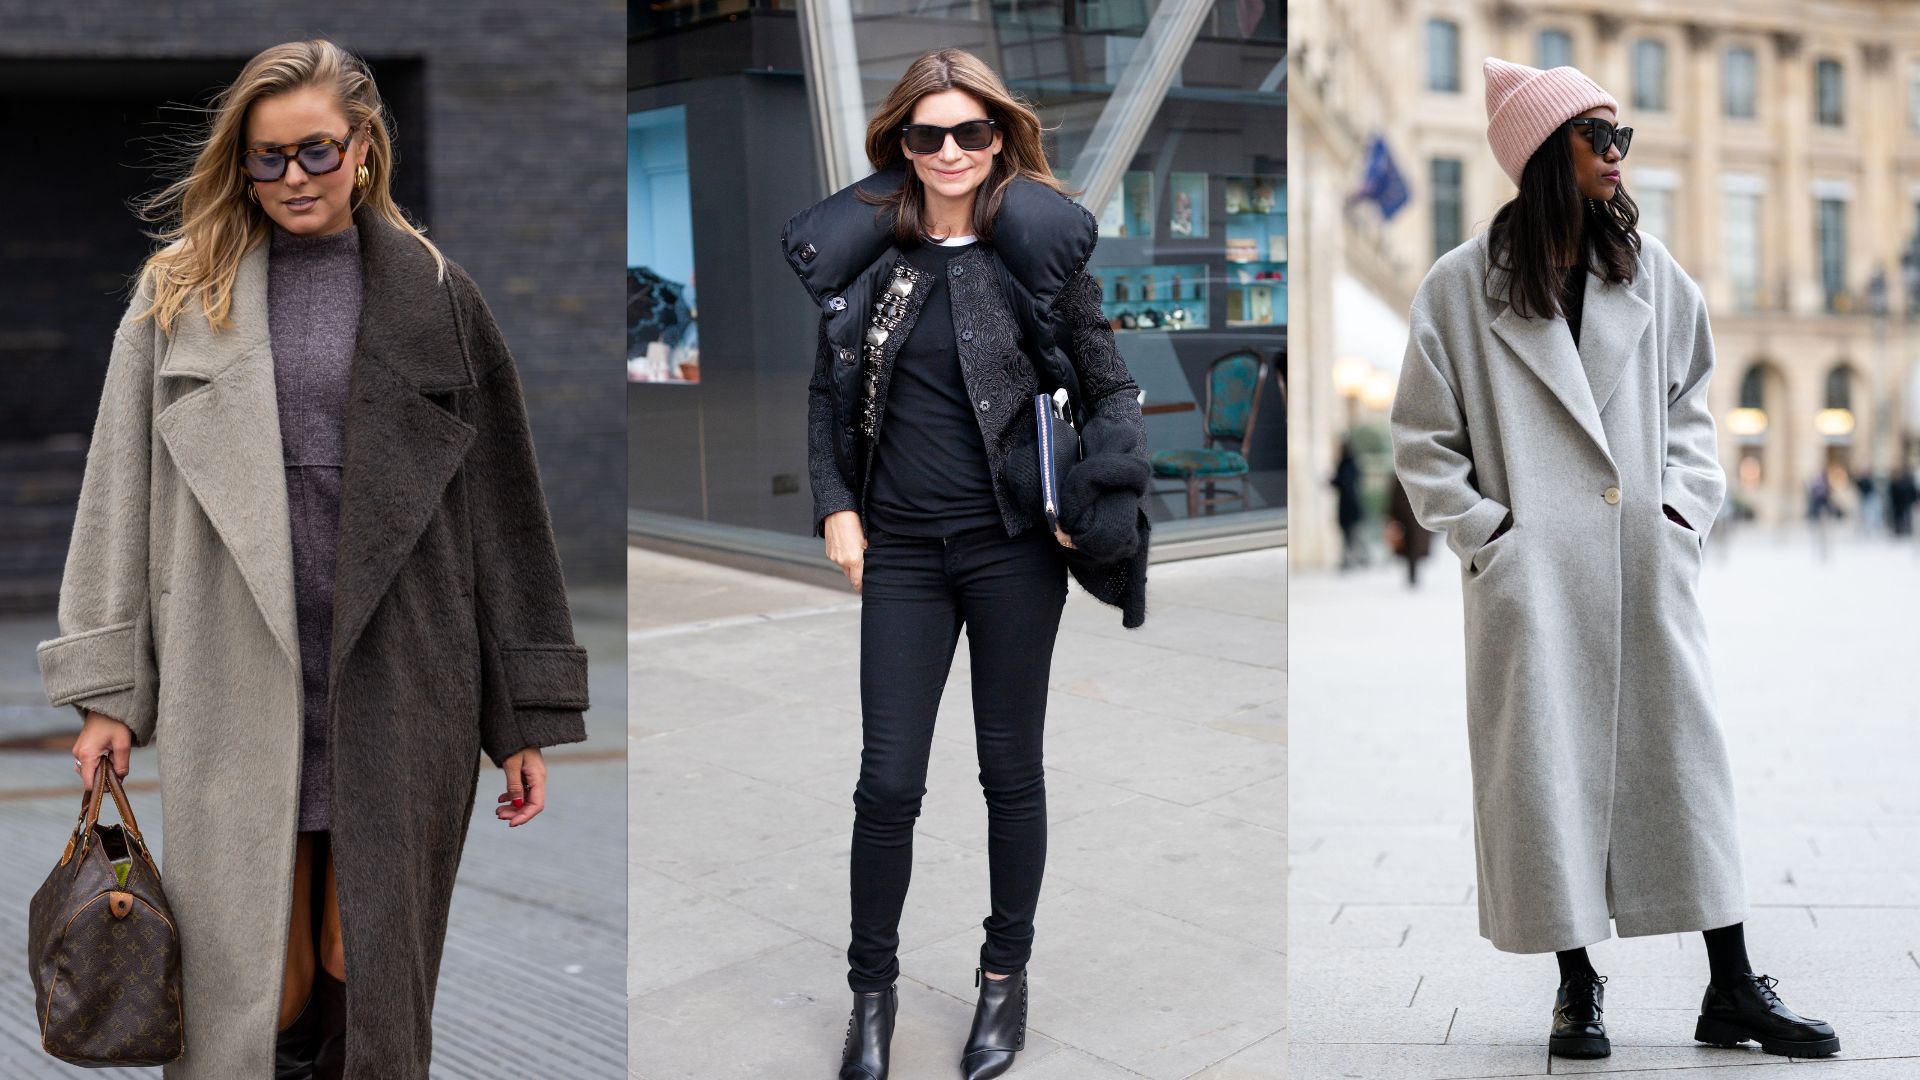 4 ways to stay warm and stylish in the snow